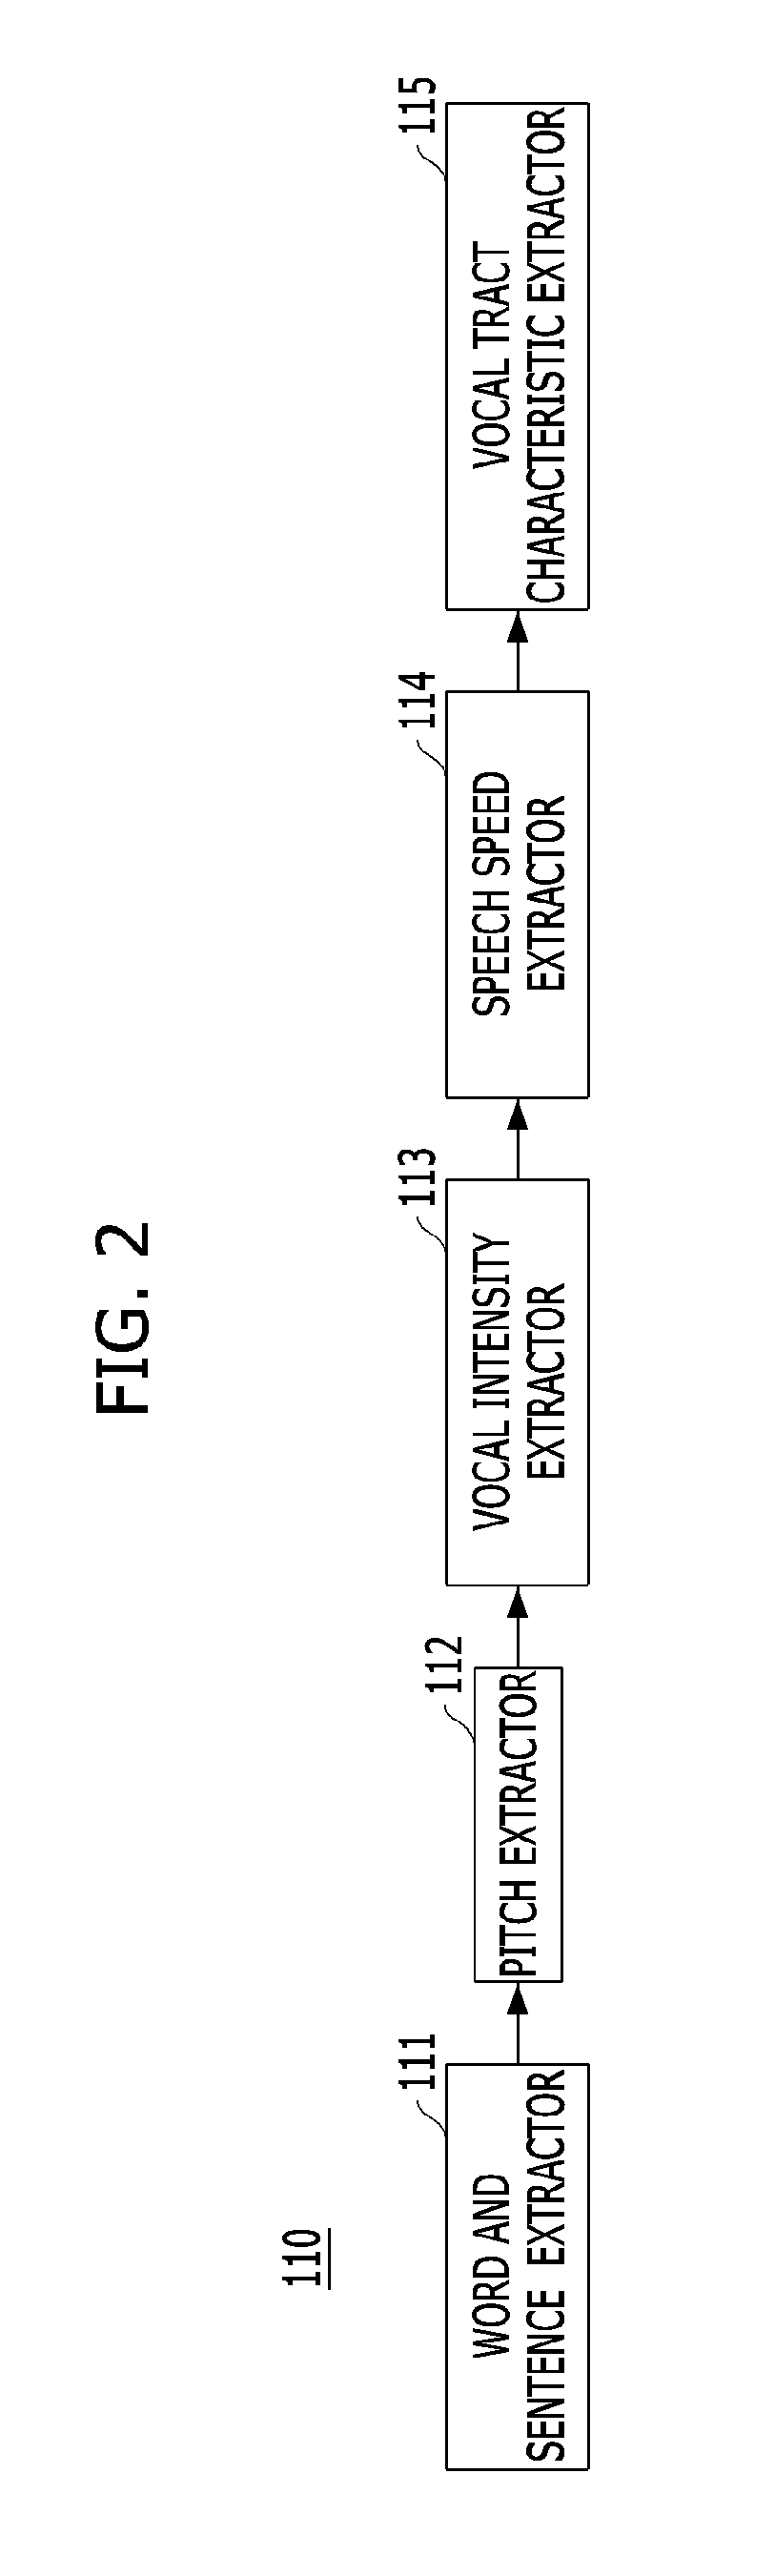 Automatic interpretation system and method for generating synthetic sound having characteristics similar to those of original speaker's voice